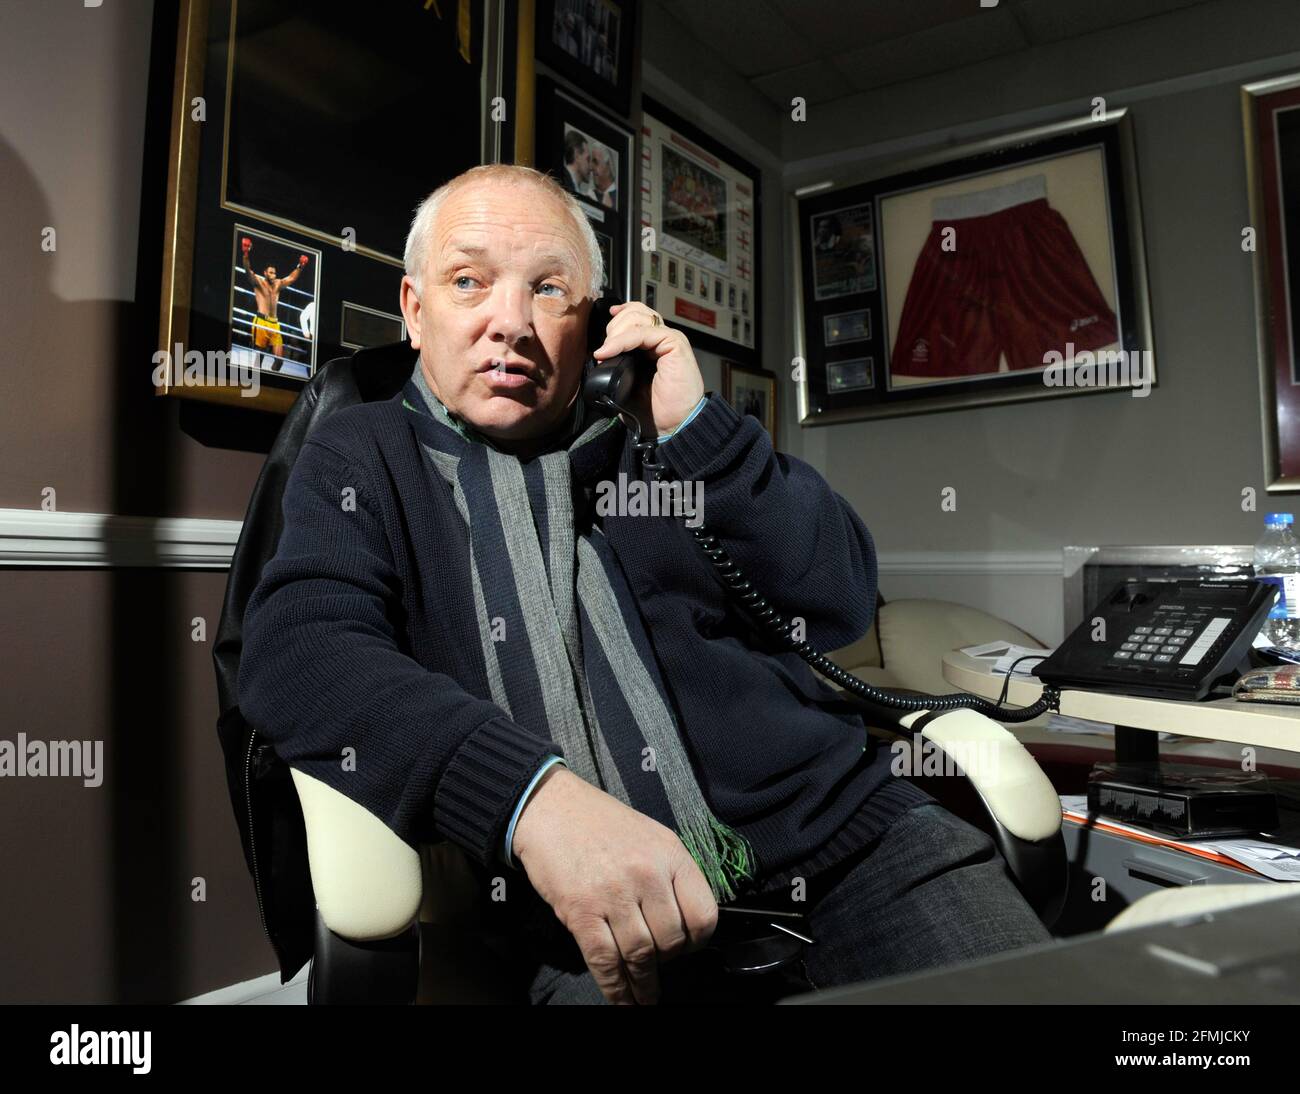 FRANK MALONEY BOXING PROMOTER AT HIS OFFICE IN CHISELHURST KENT. 4/1/10  PICTURE DAVID ASHDOWN Stock Photo